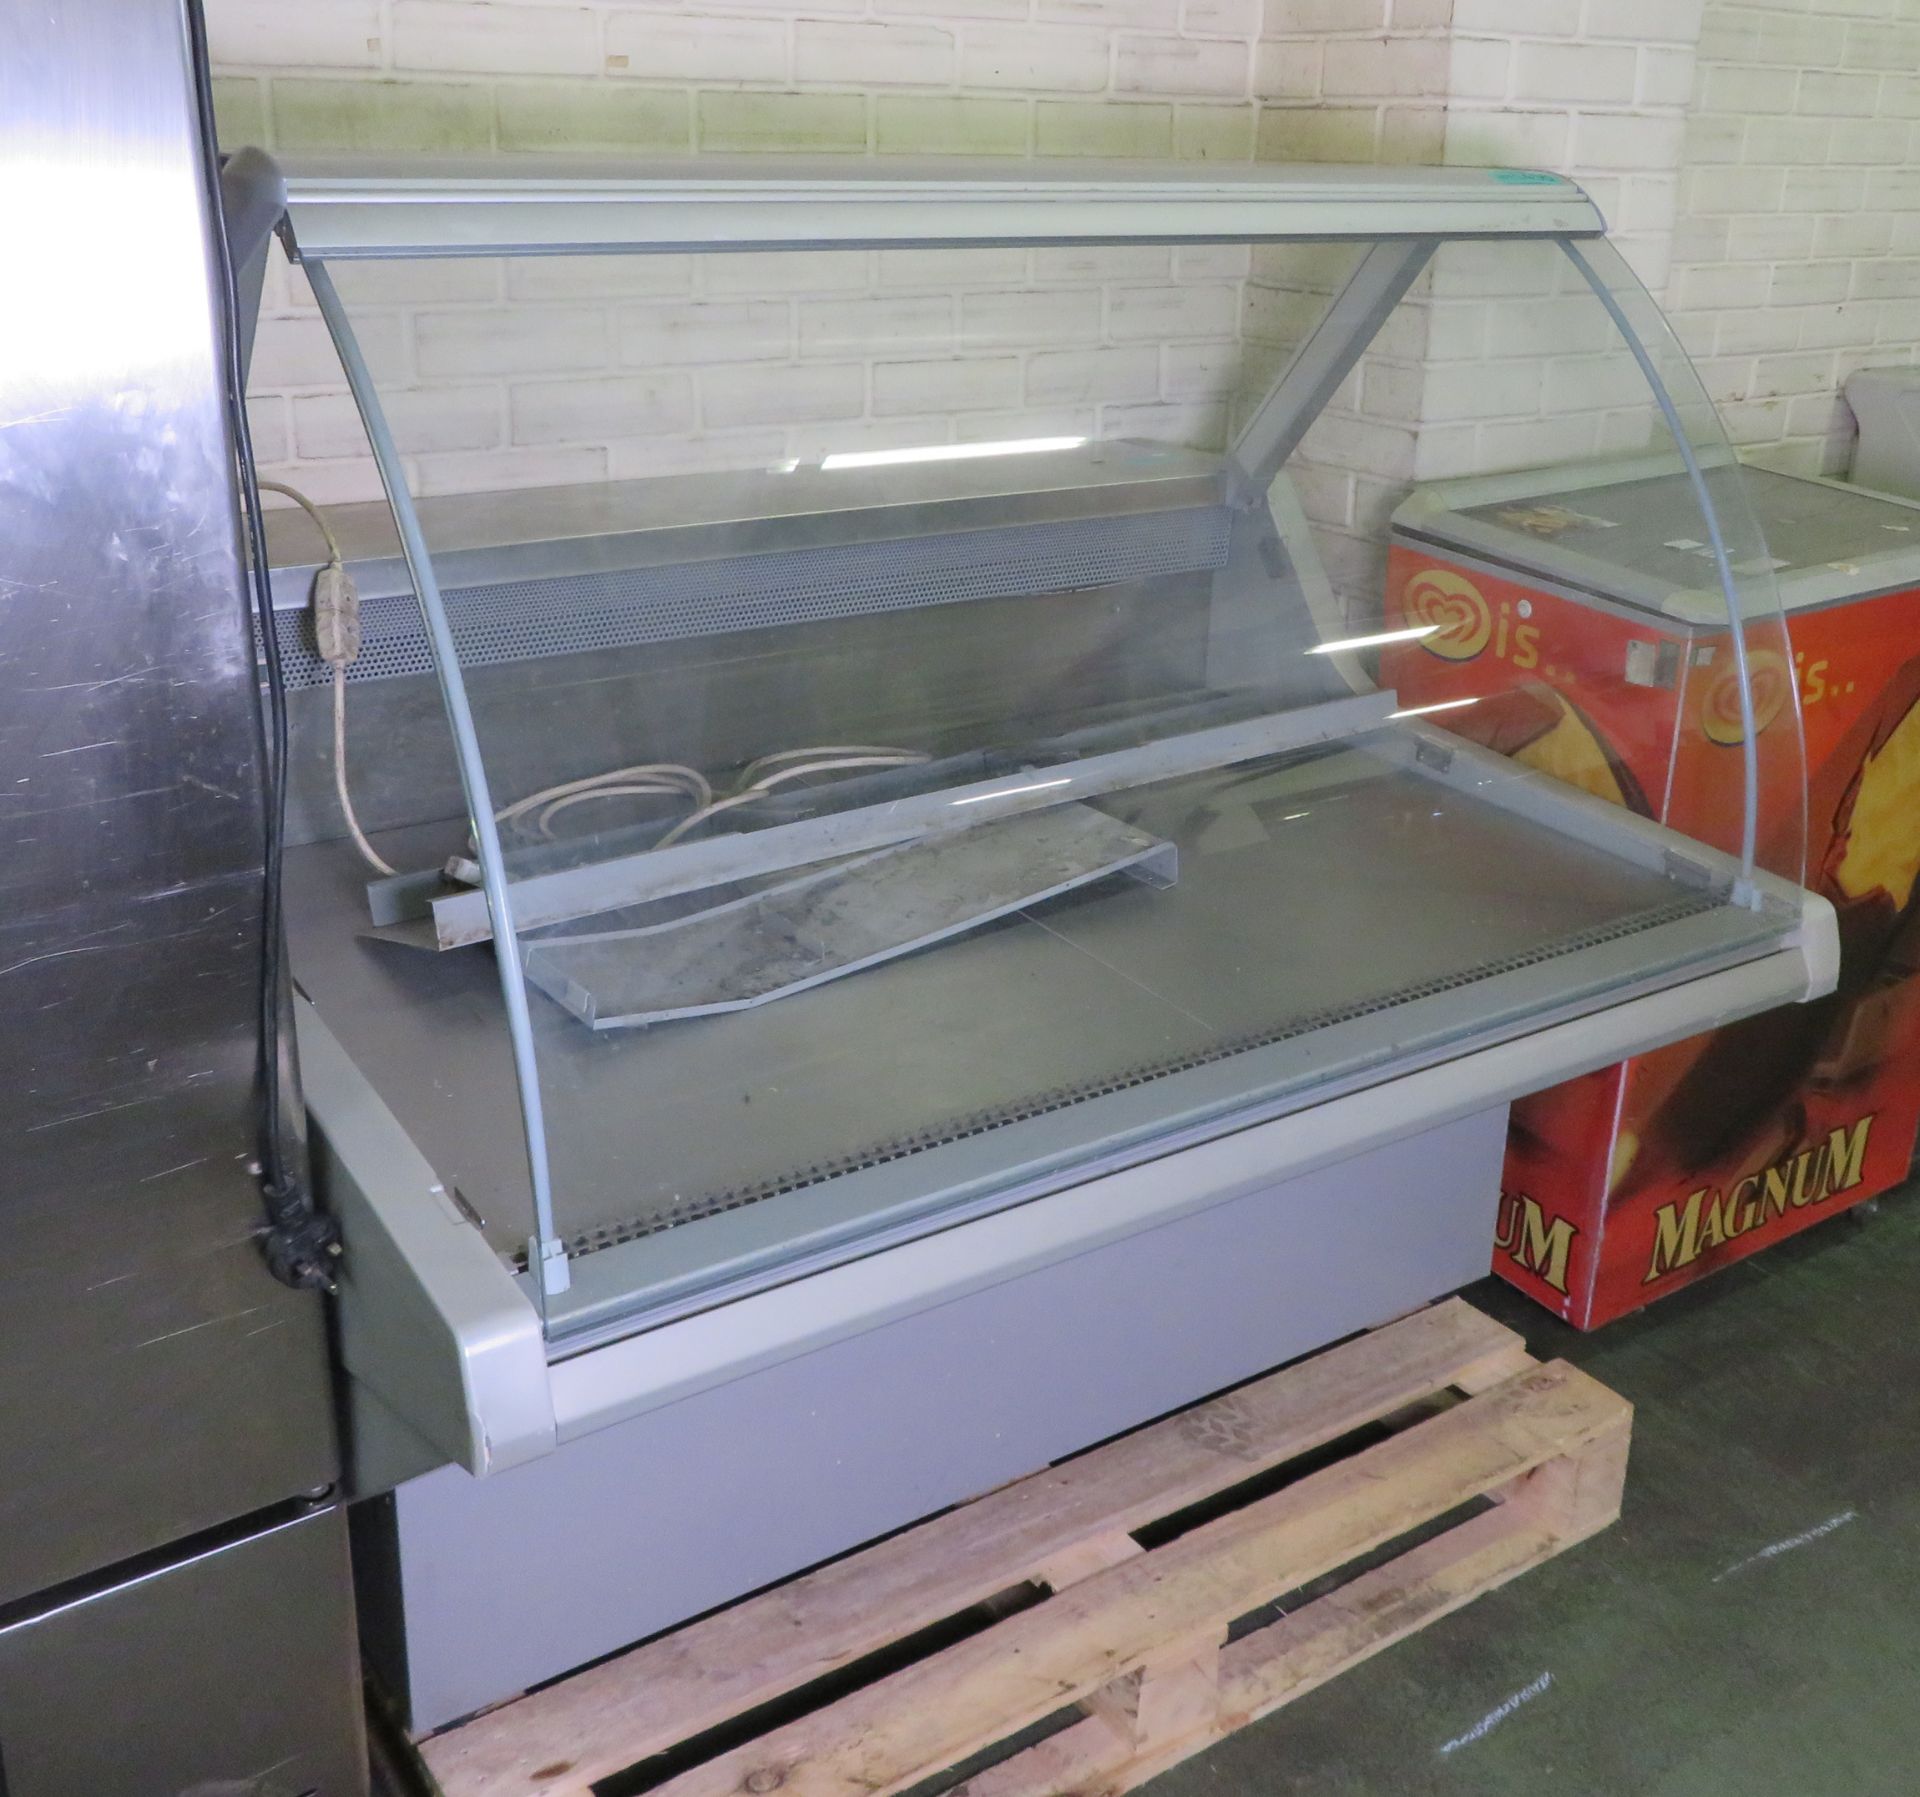 Linde Refrigerated Display Counter - Model -CRONOS X 125 - Image 3 of 3